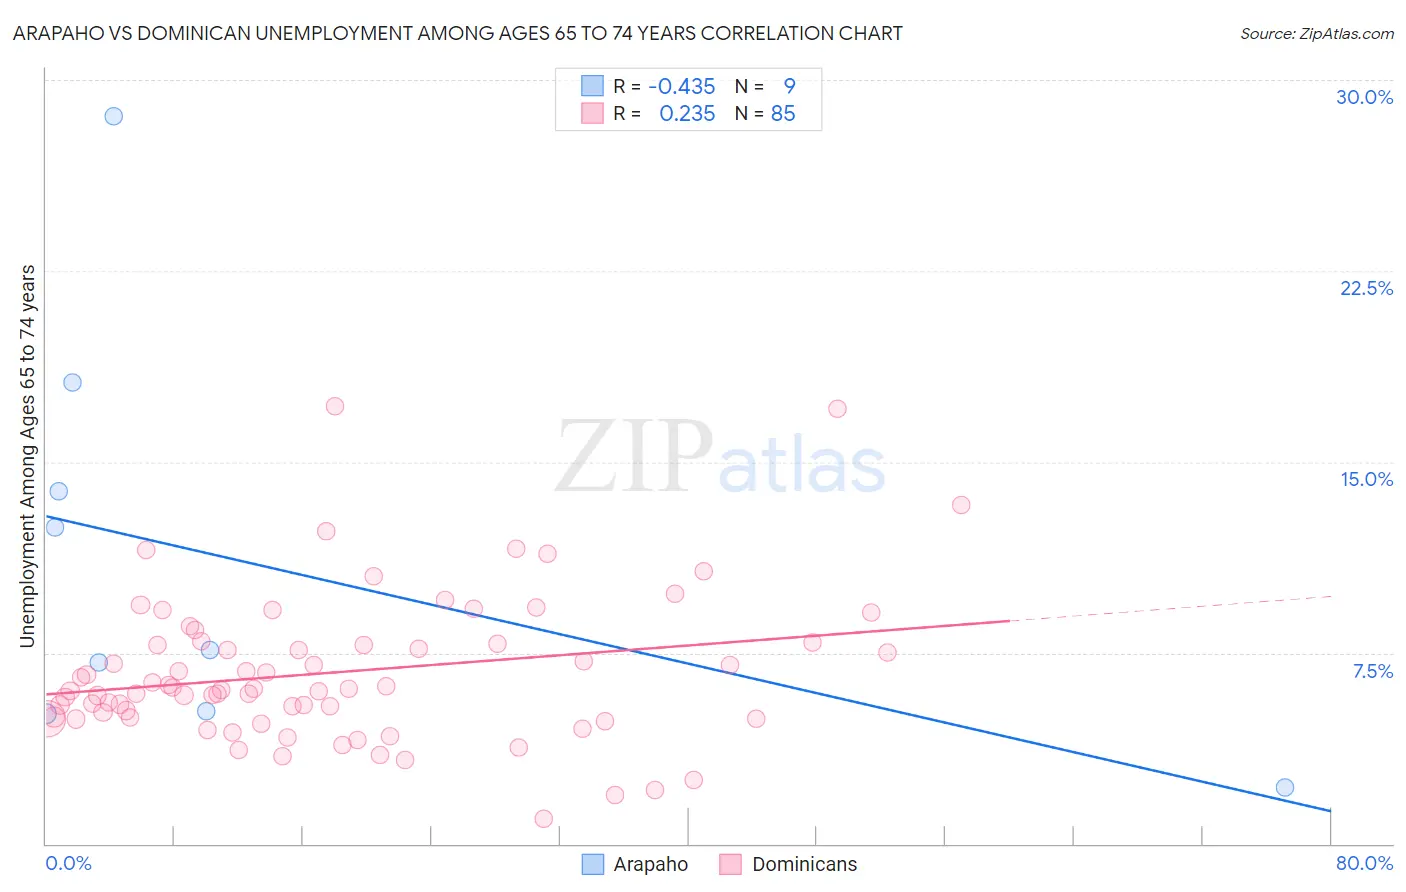 Arapaho vs Dominican Unemployment Among Ages 65 to 74 years